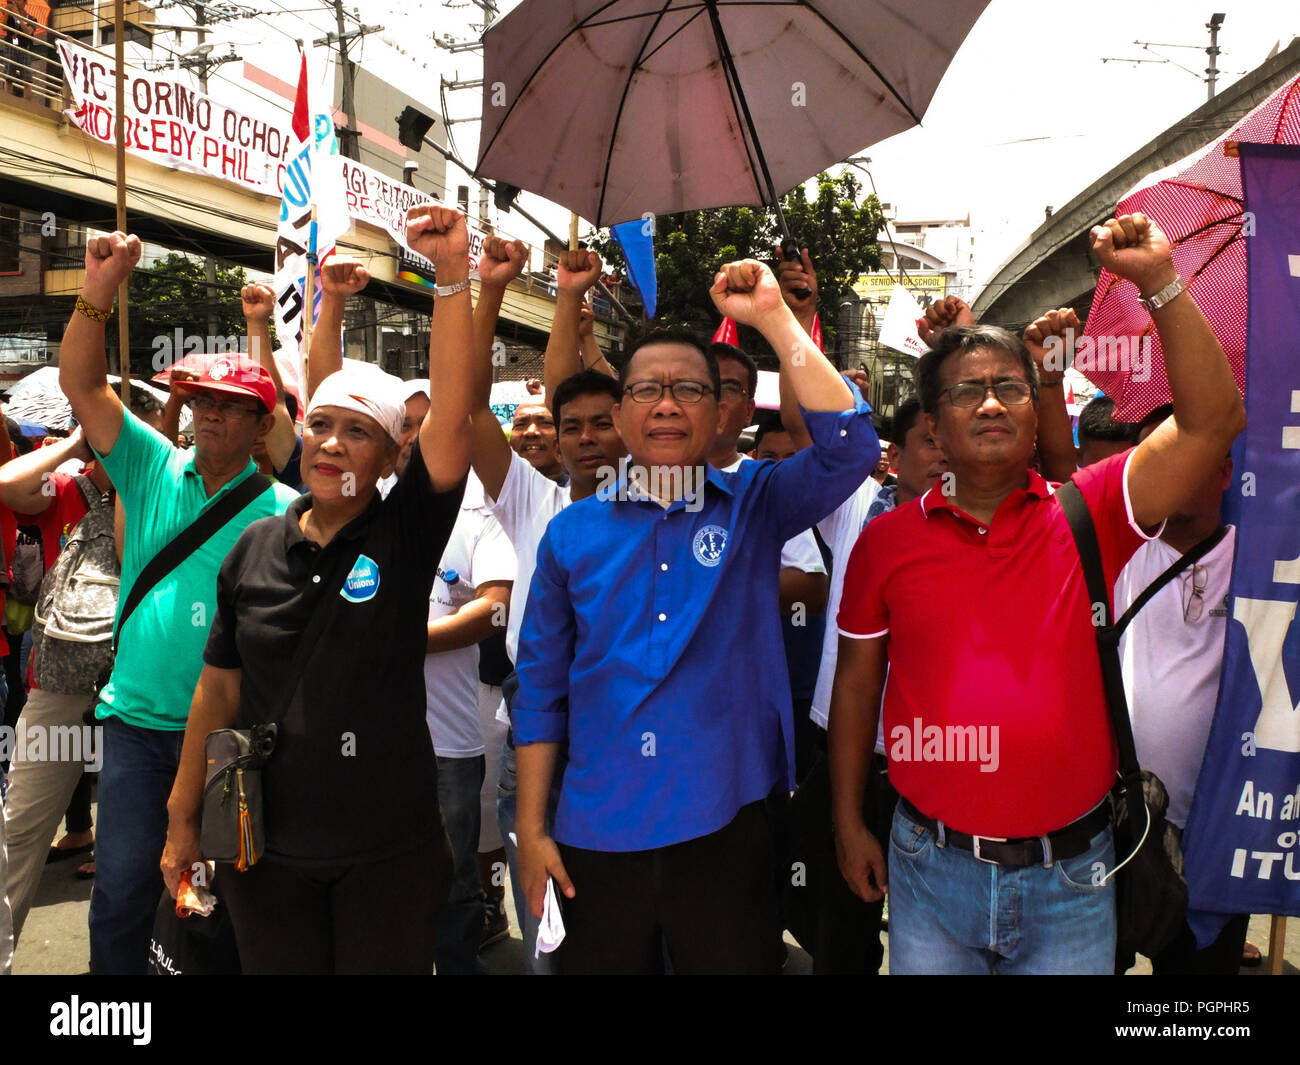 Manila, Philippines. 7th Feb, 2013. Labor leaders raise their fist during the National Heroes Day protest.Labor Union from different business sectors leads National Heroes' Day march to Mendiola. Labor coalitions will mark National Heroes' Day on Monday by protesting the Duterte administration's alleged failure to address workers' issues. Credit: Josefiel Rivera/SOPA Images/ZUMA Wire/Alamy Live News Stock Photo